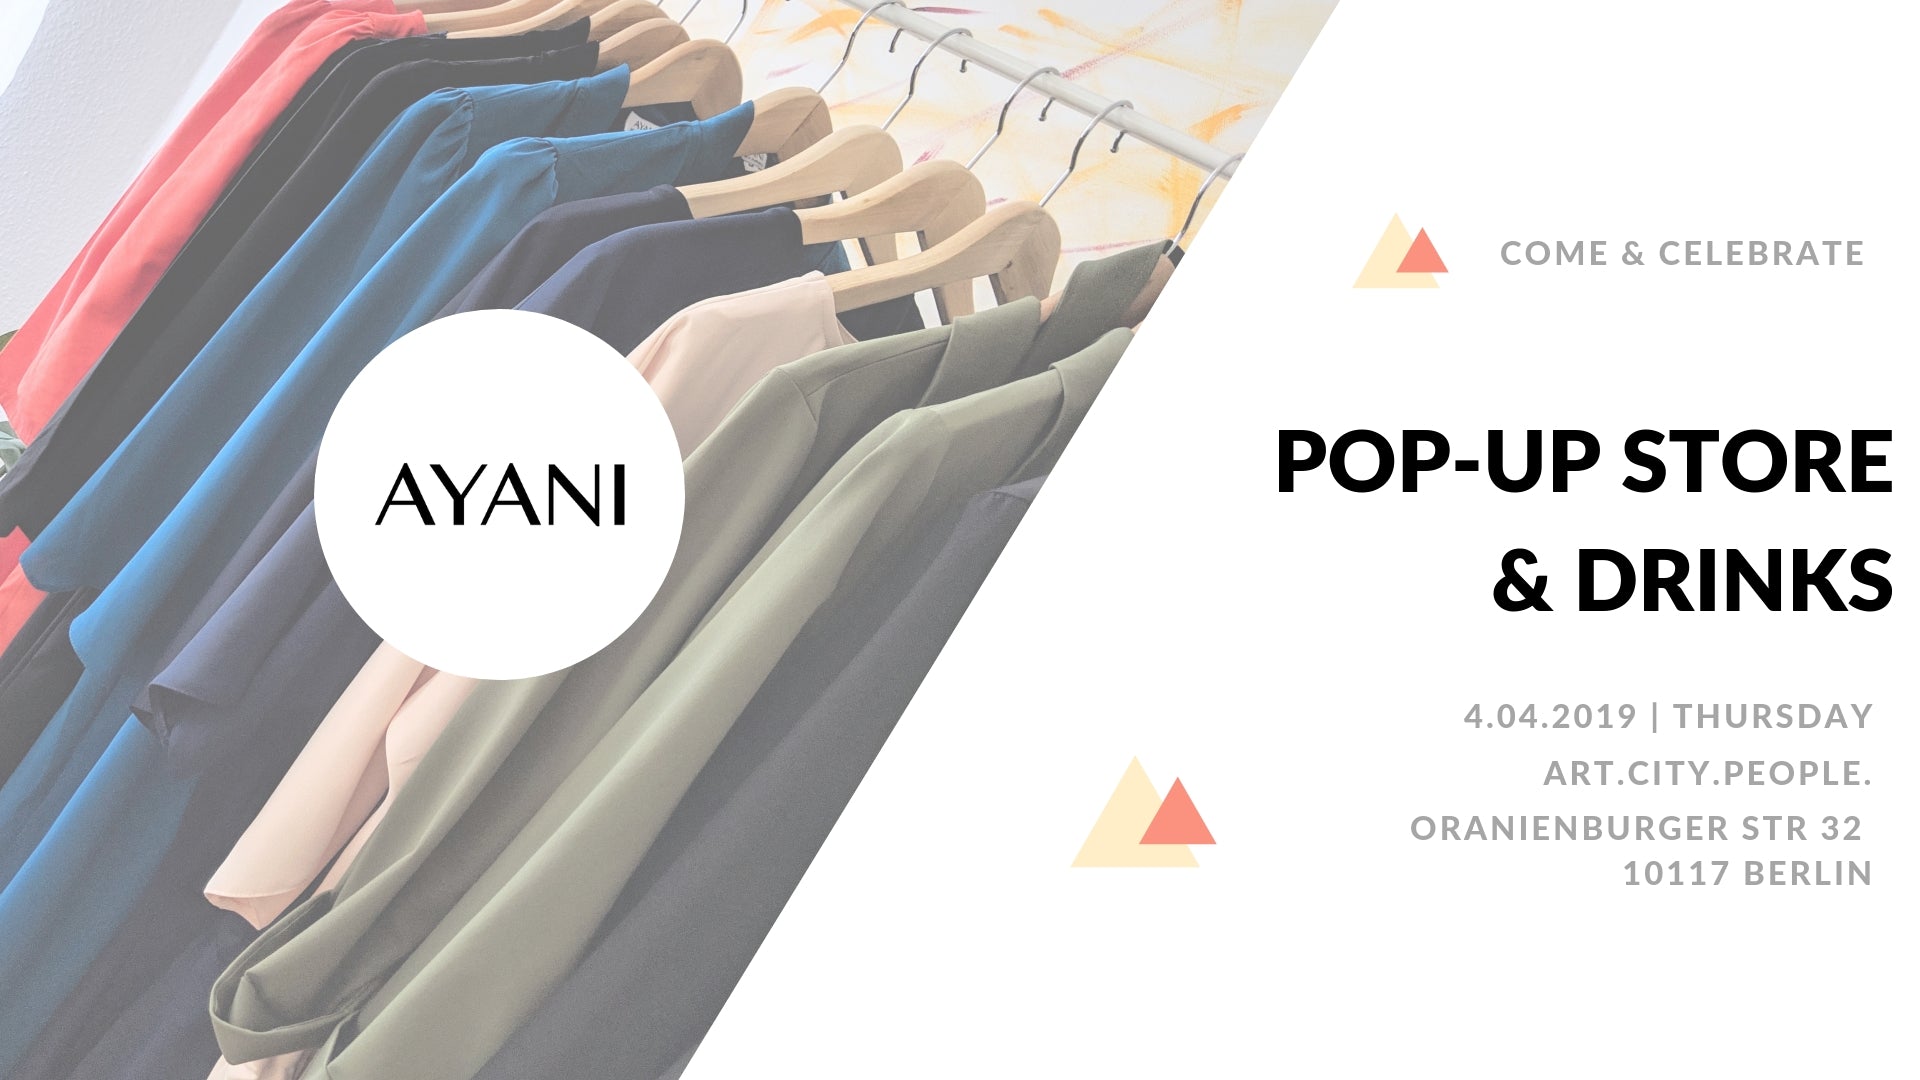 AYANI Pop-Up Store & Drinks